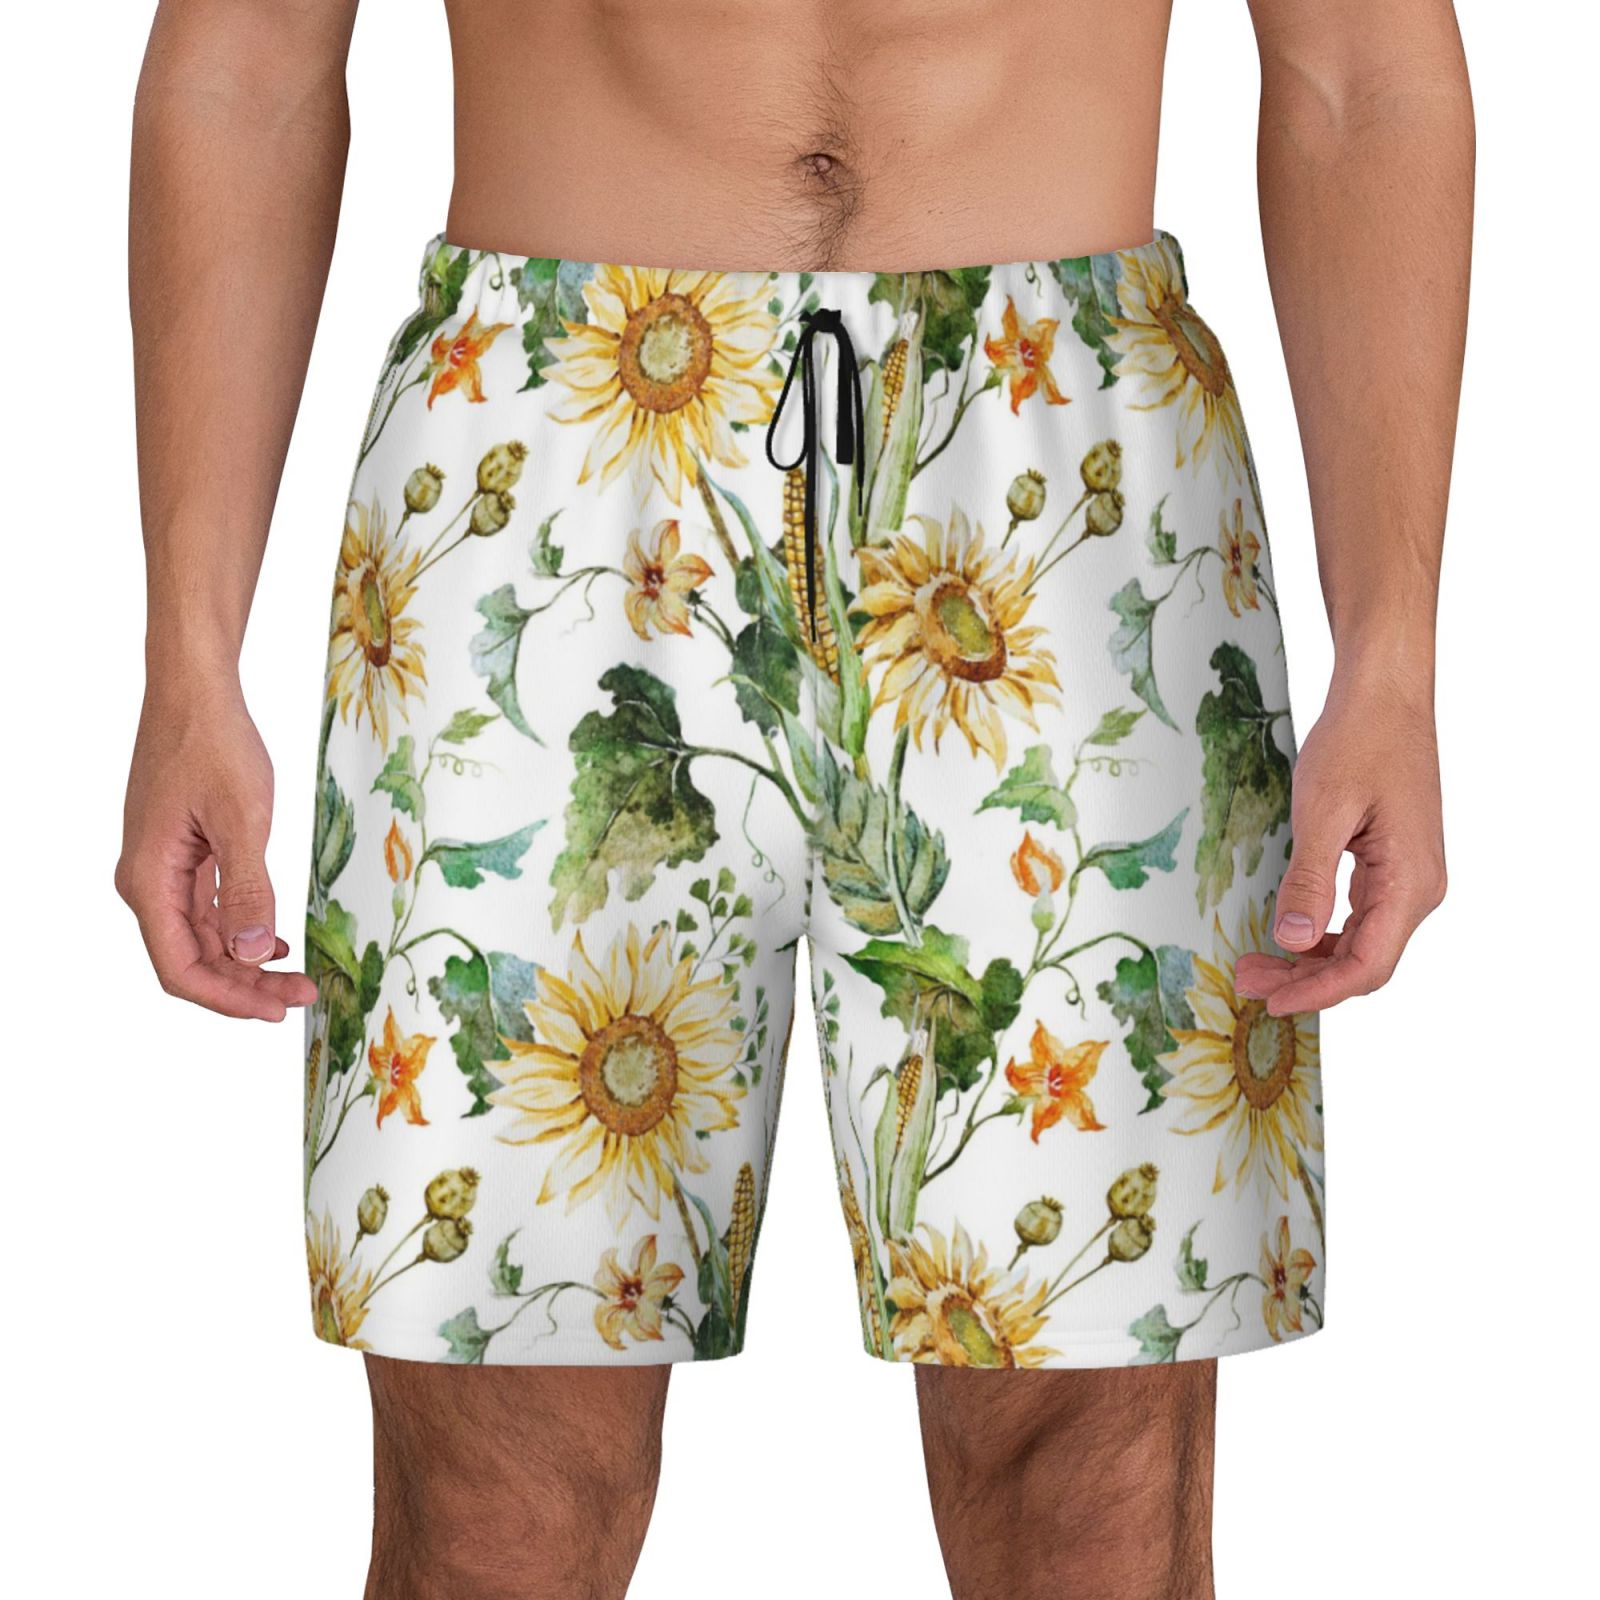 Haiem Watercolor Bright Sunflowers Mens Swim Trunks with Compression ...